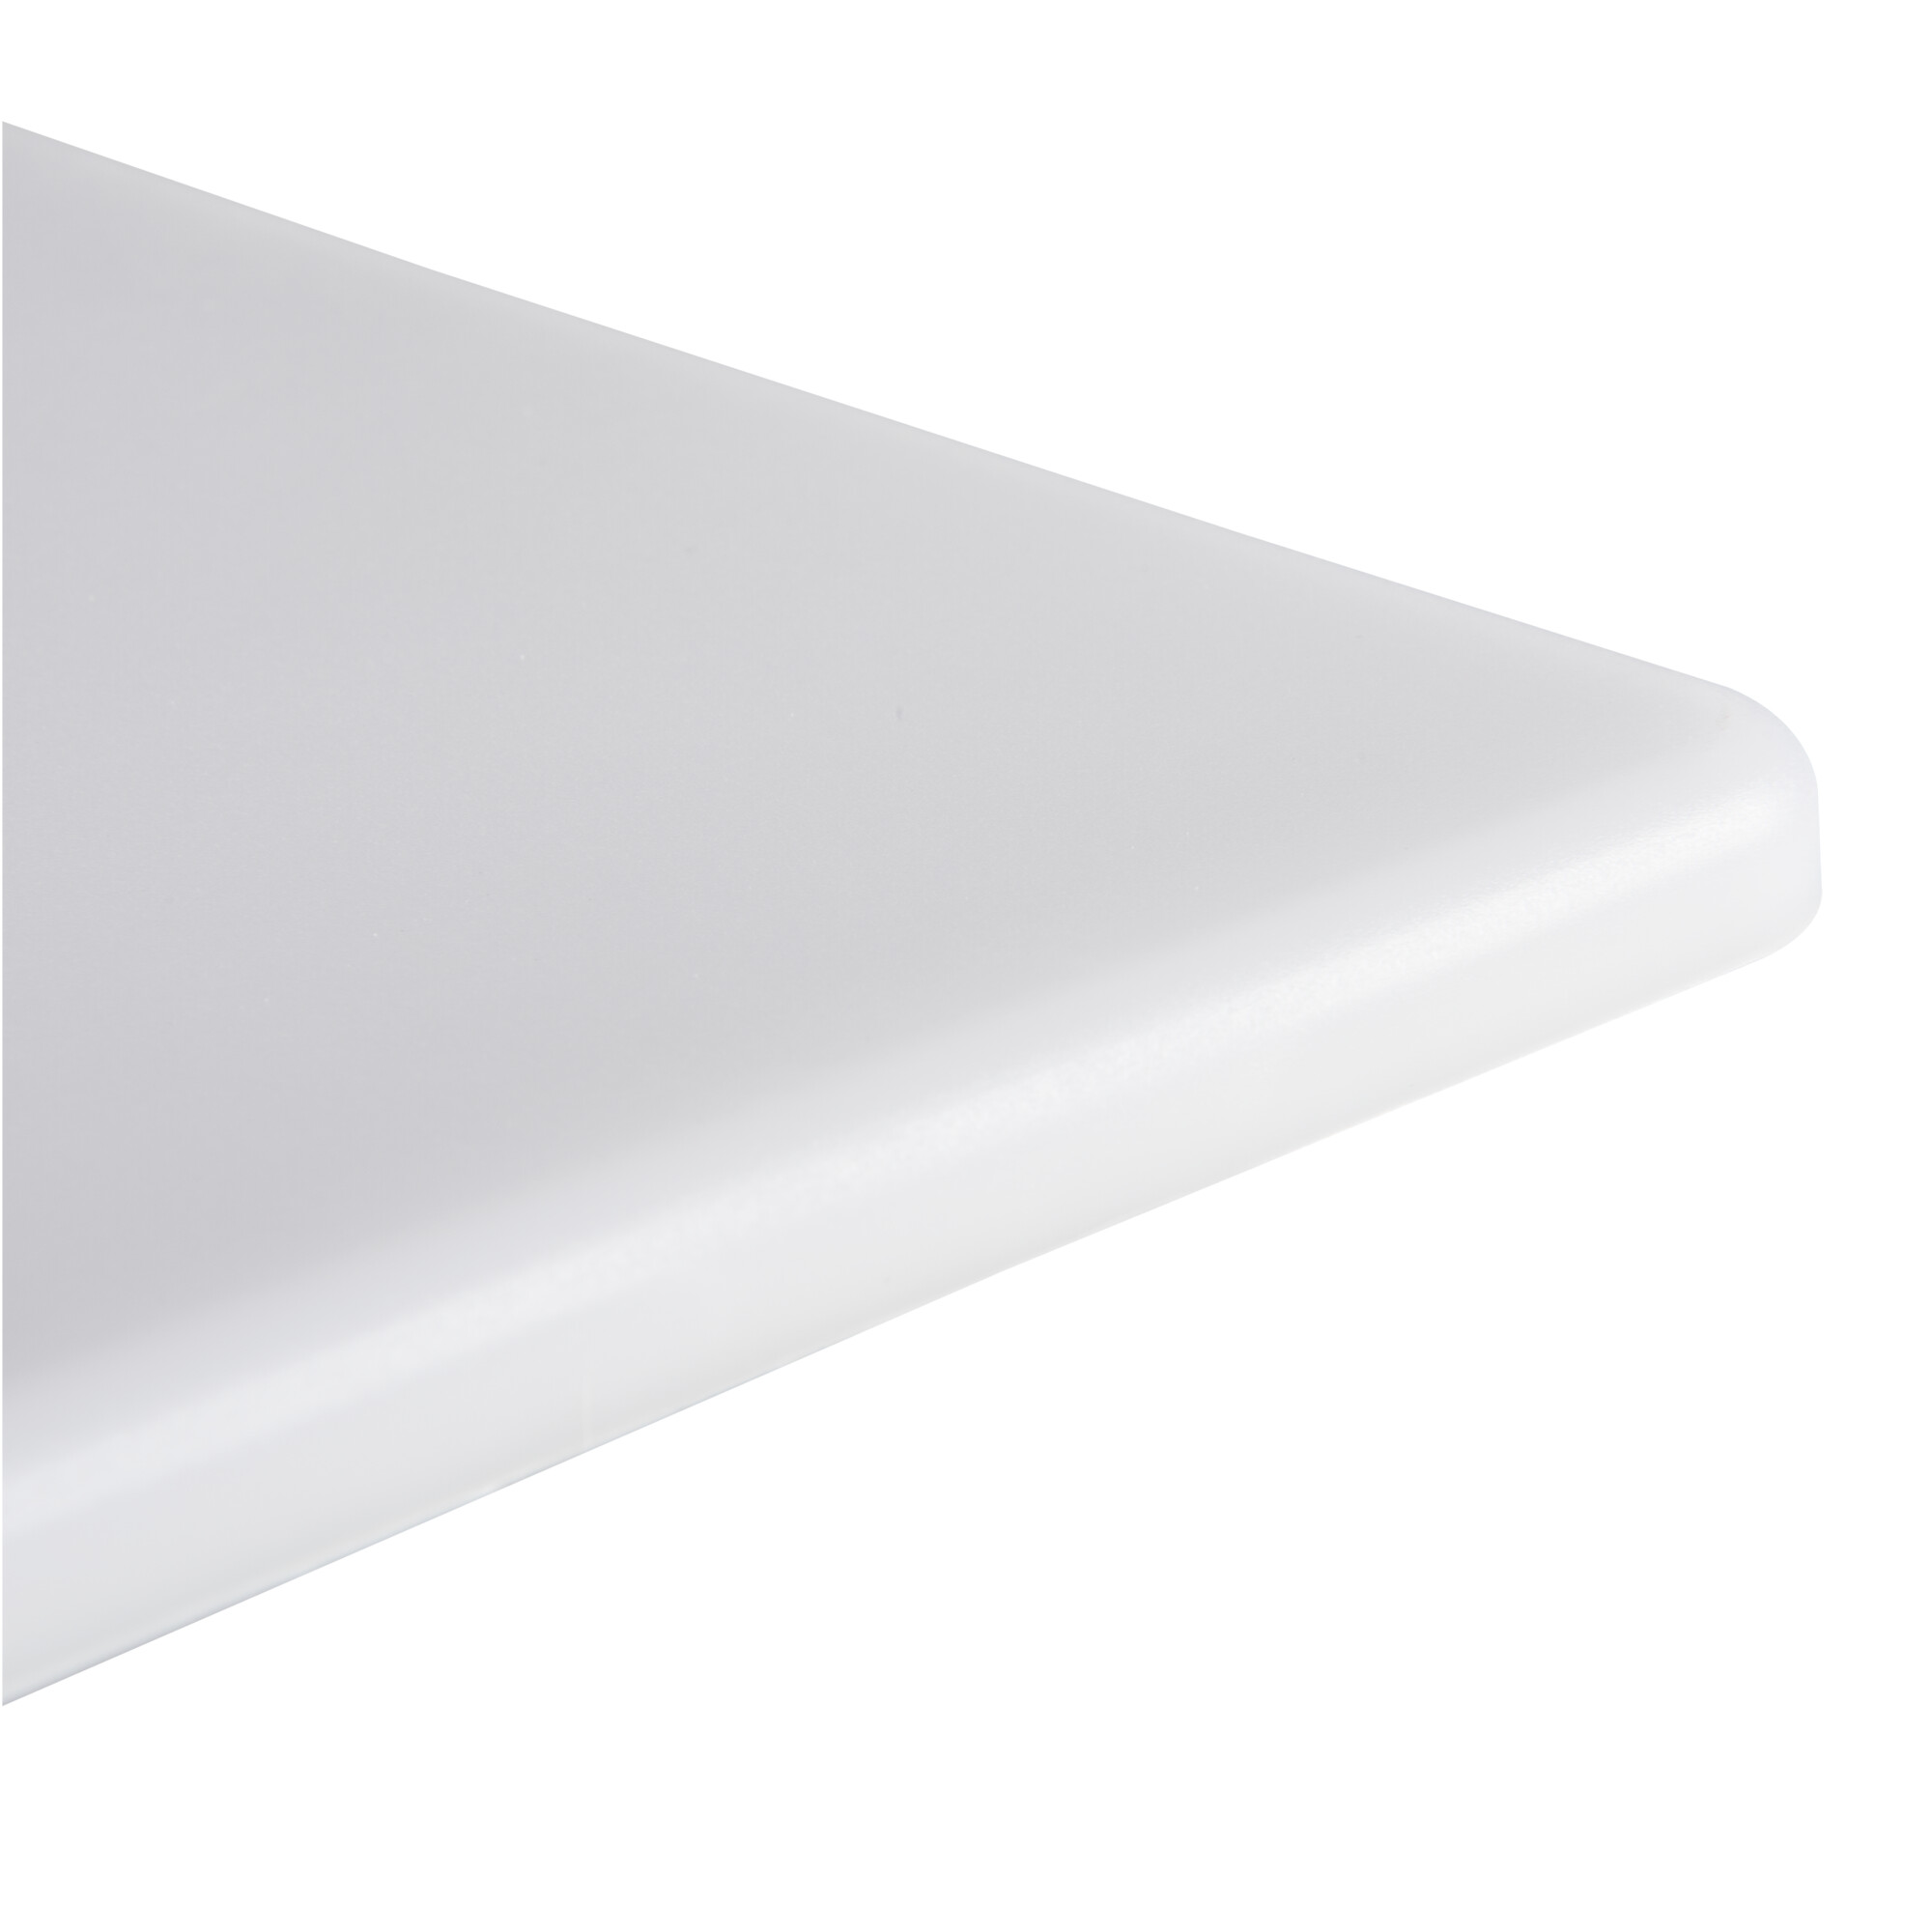 AREL LED DL 6W-NW - KANLUX